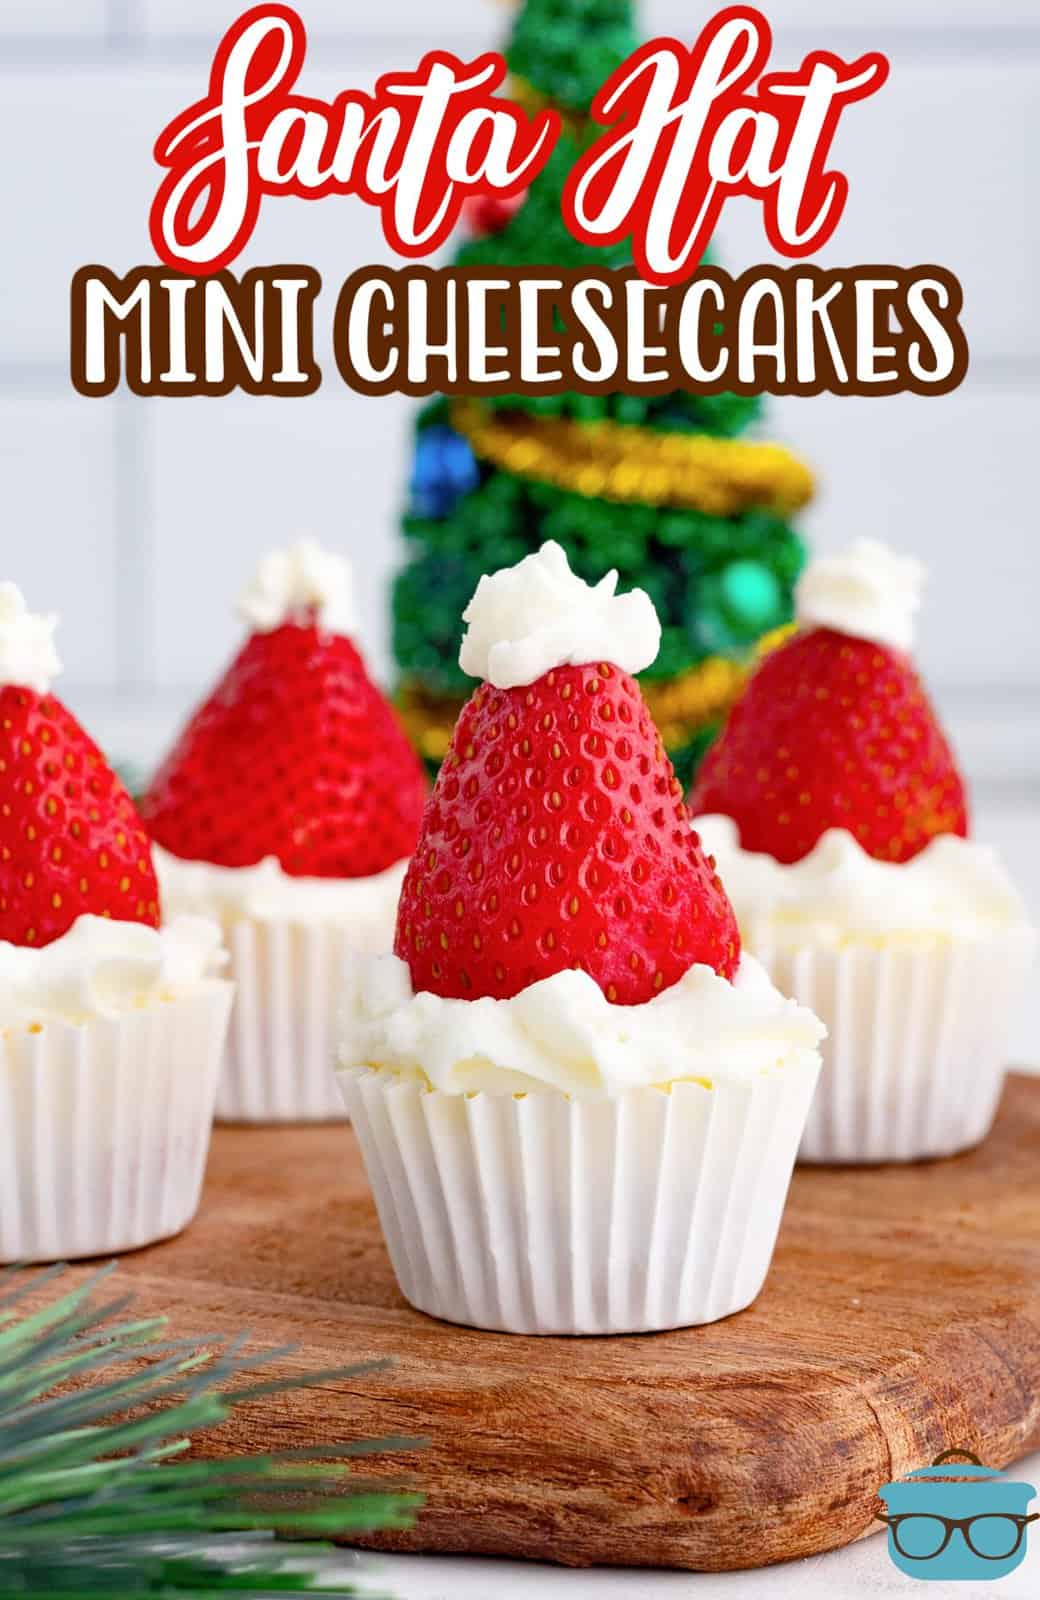 Pinterest image of Santa Hat Mini Cheesecakes on wooden board garnished.